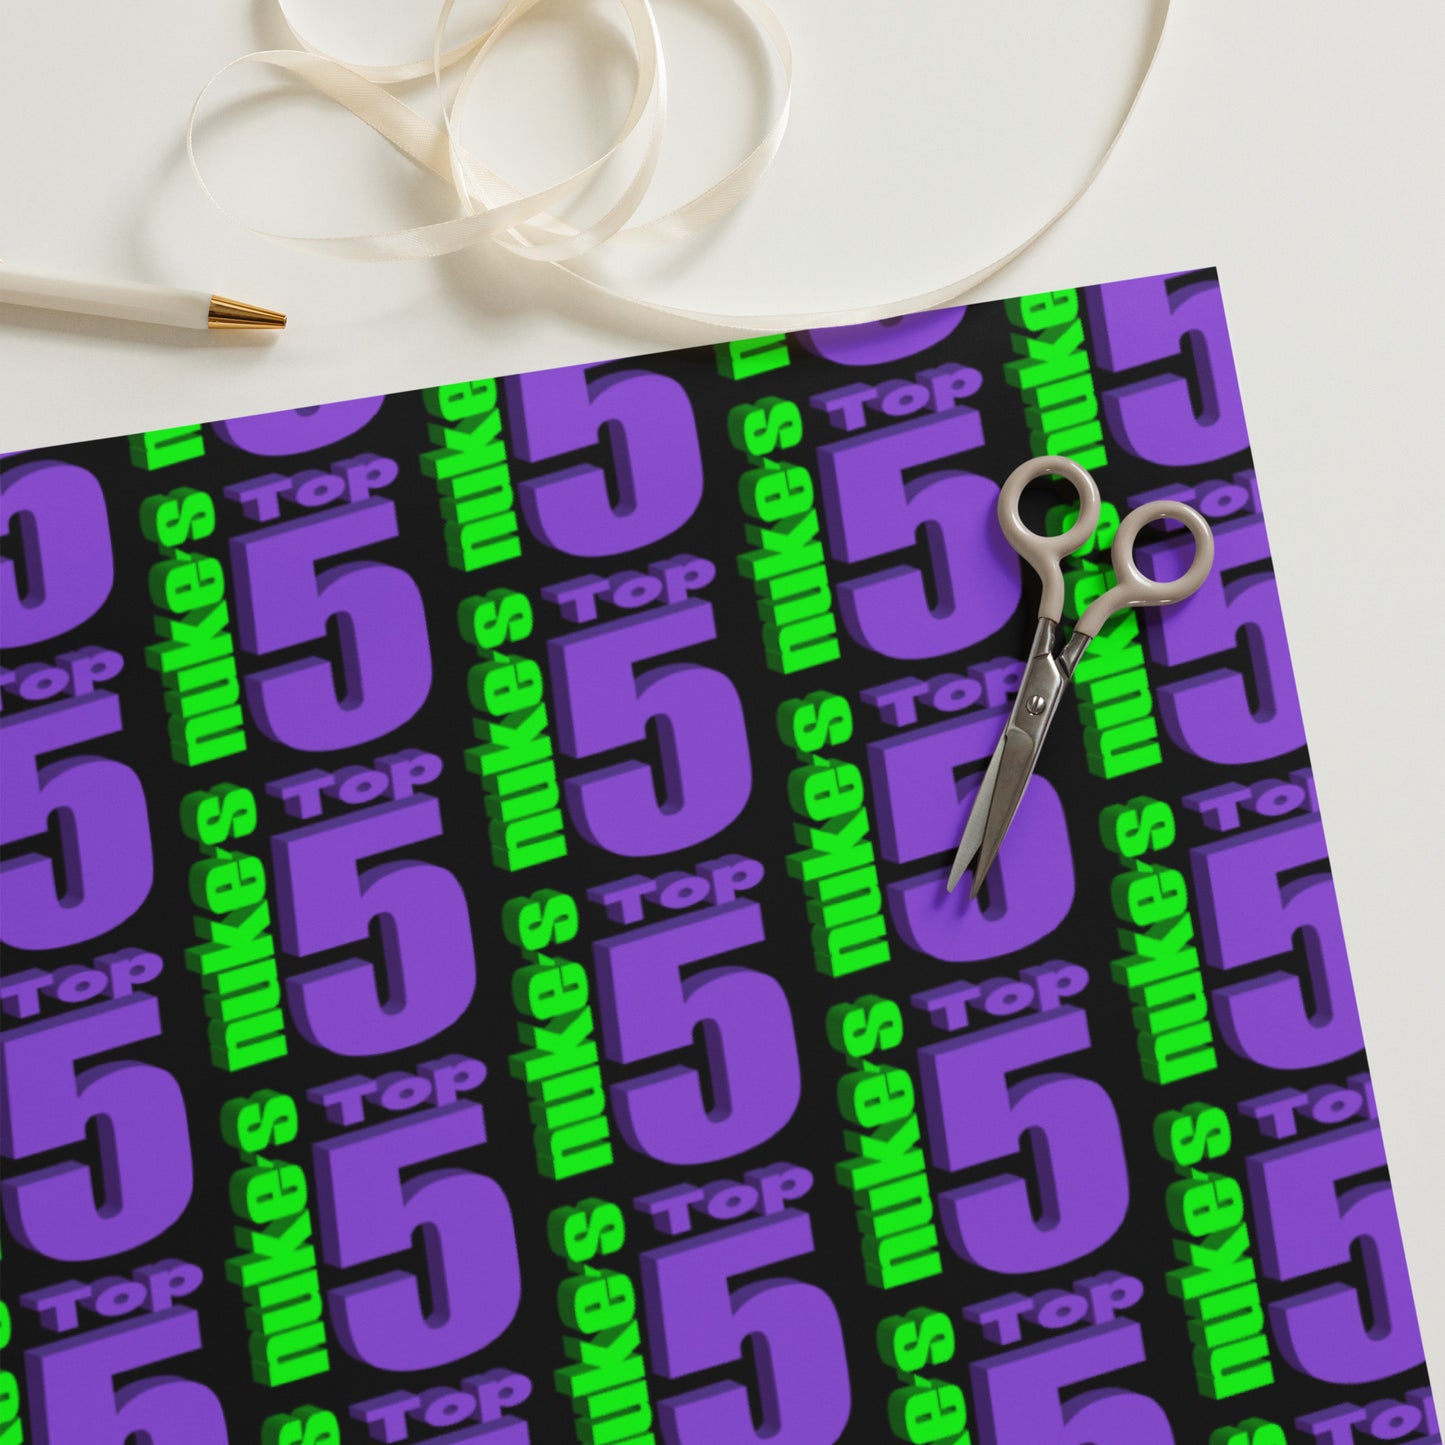 Nuke's Top 5 Wrapping Paper